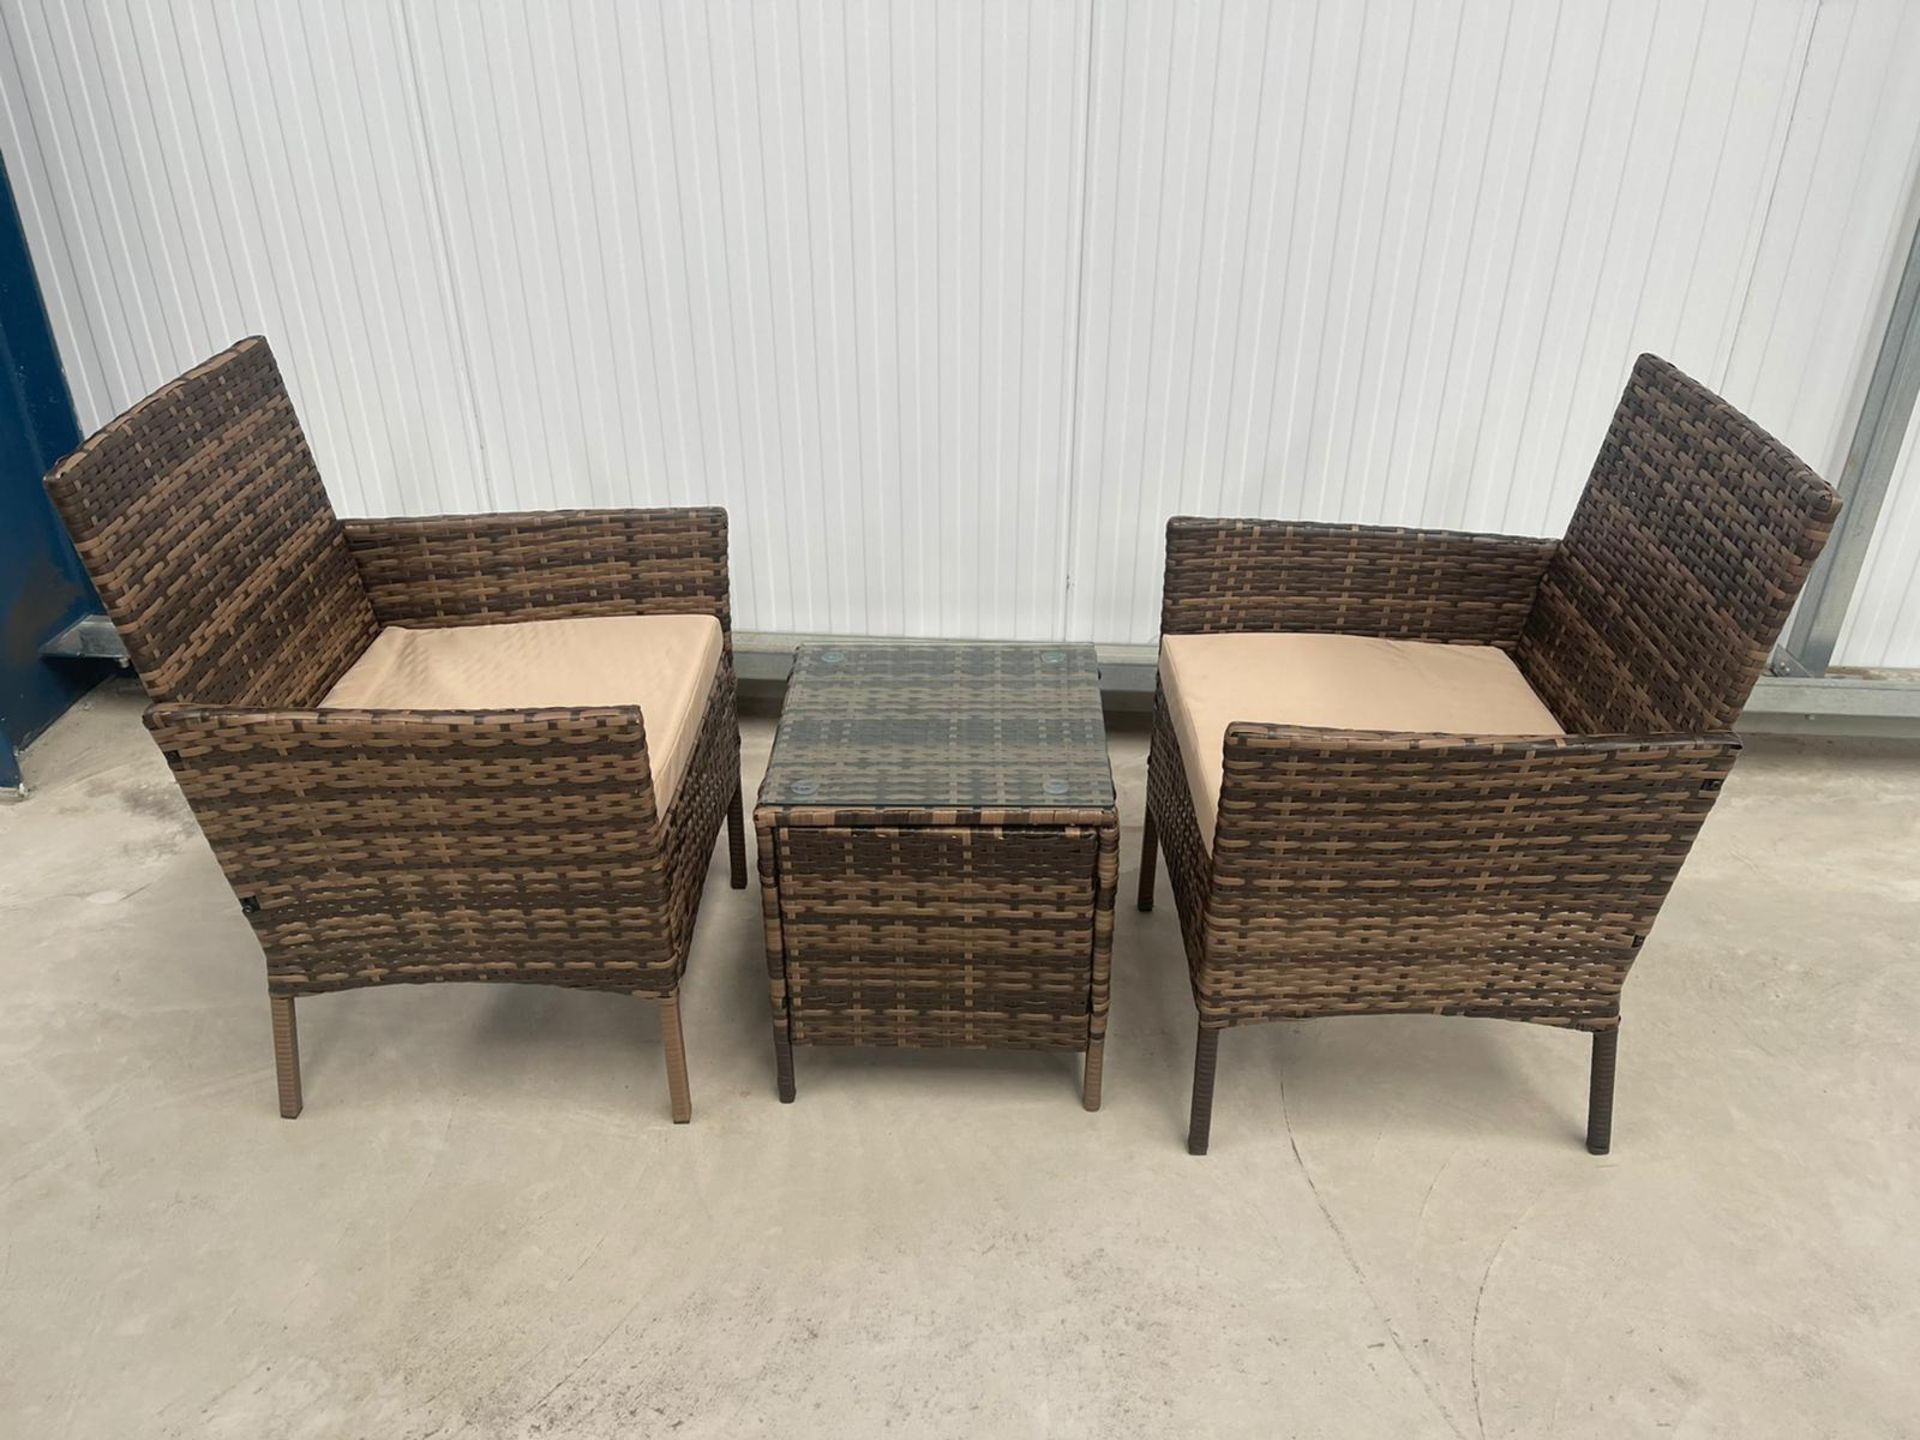 RRP £199 - NEW BROWN BISTRO SET. TABLE 40 X 40 X 45CM, CHAIR 52 X 56 X 83CM74 - Image 2 of 4